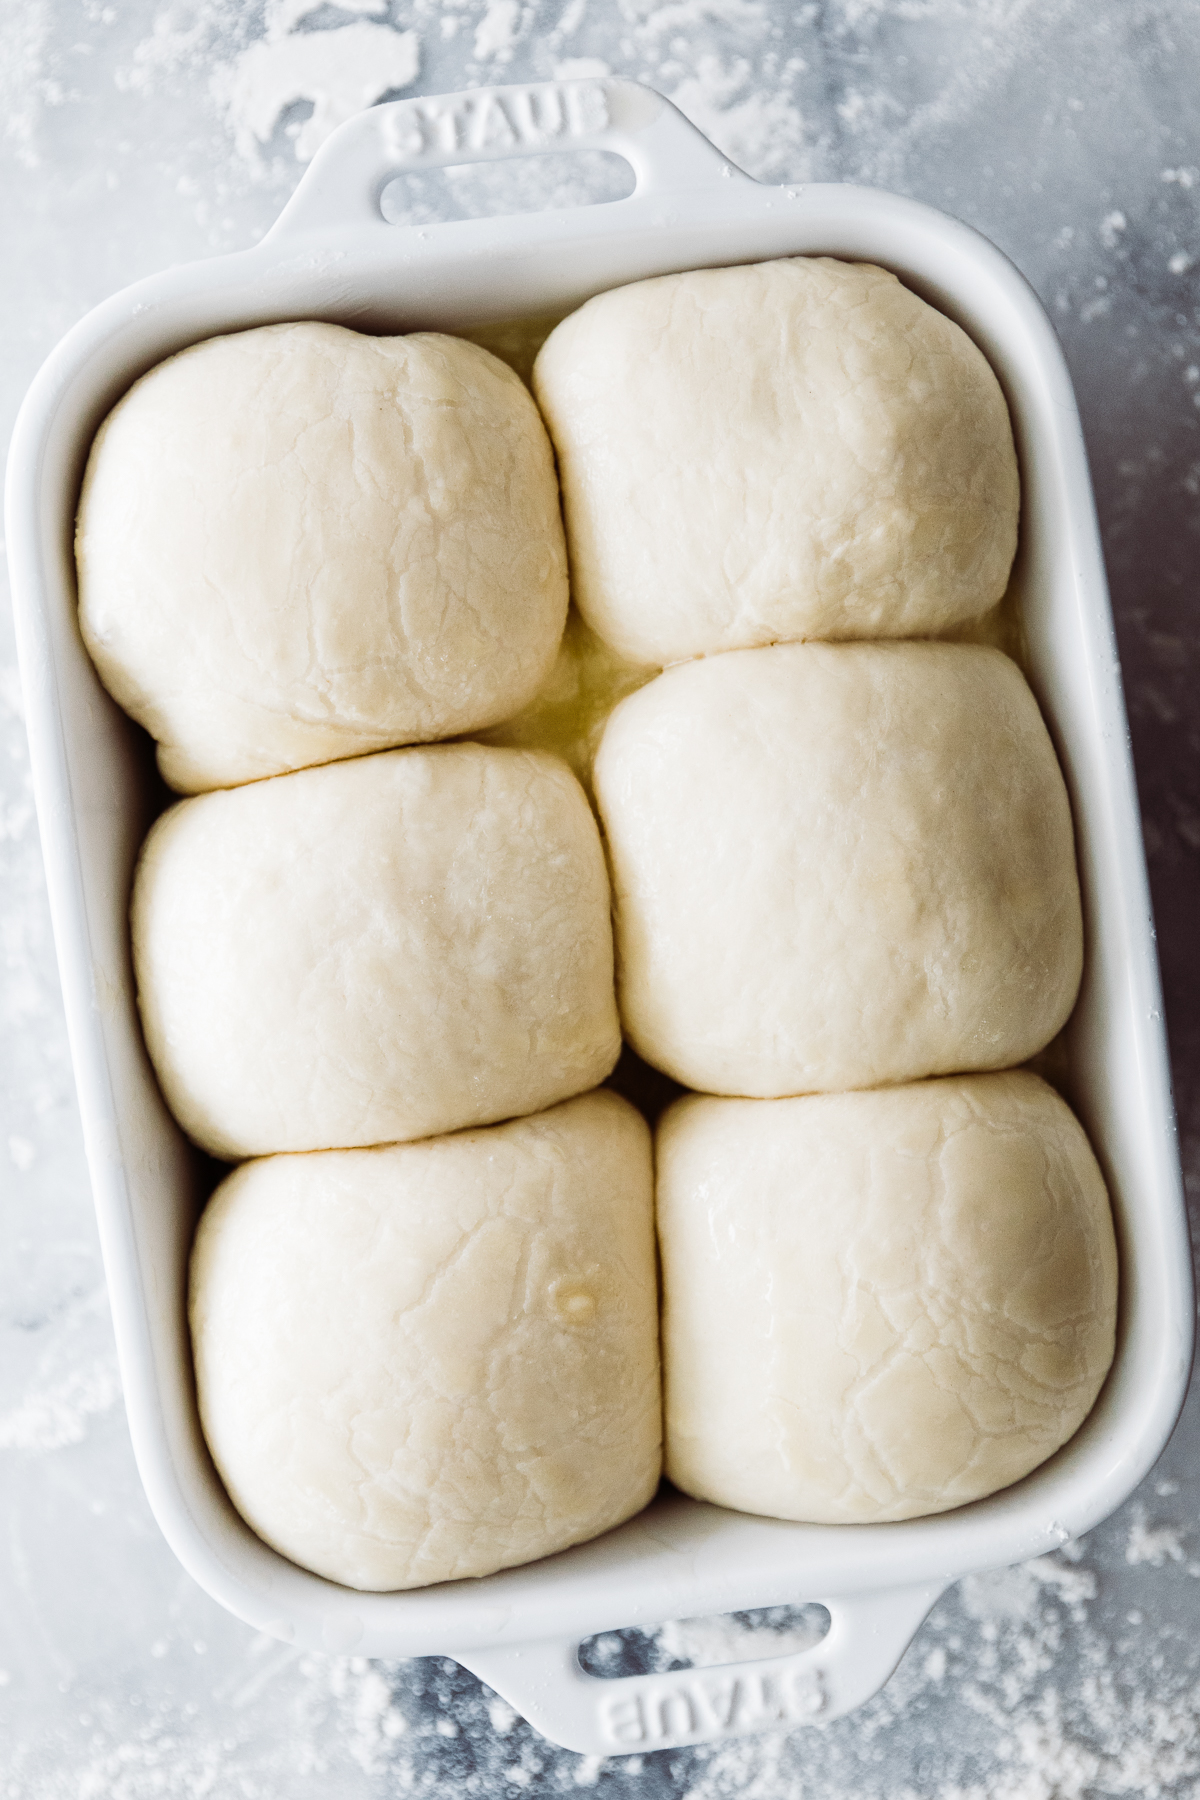 Parker house rolls rising in small pan. 